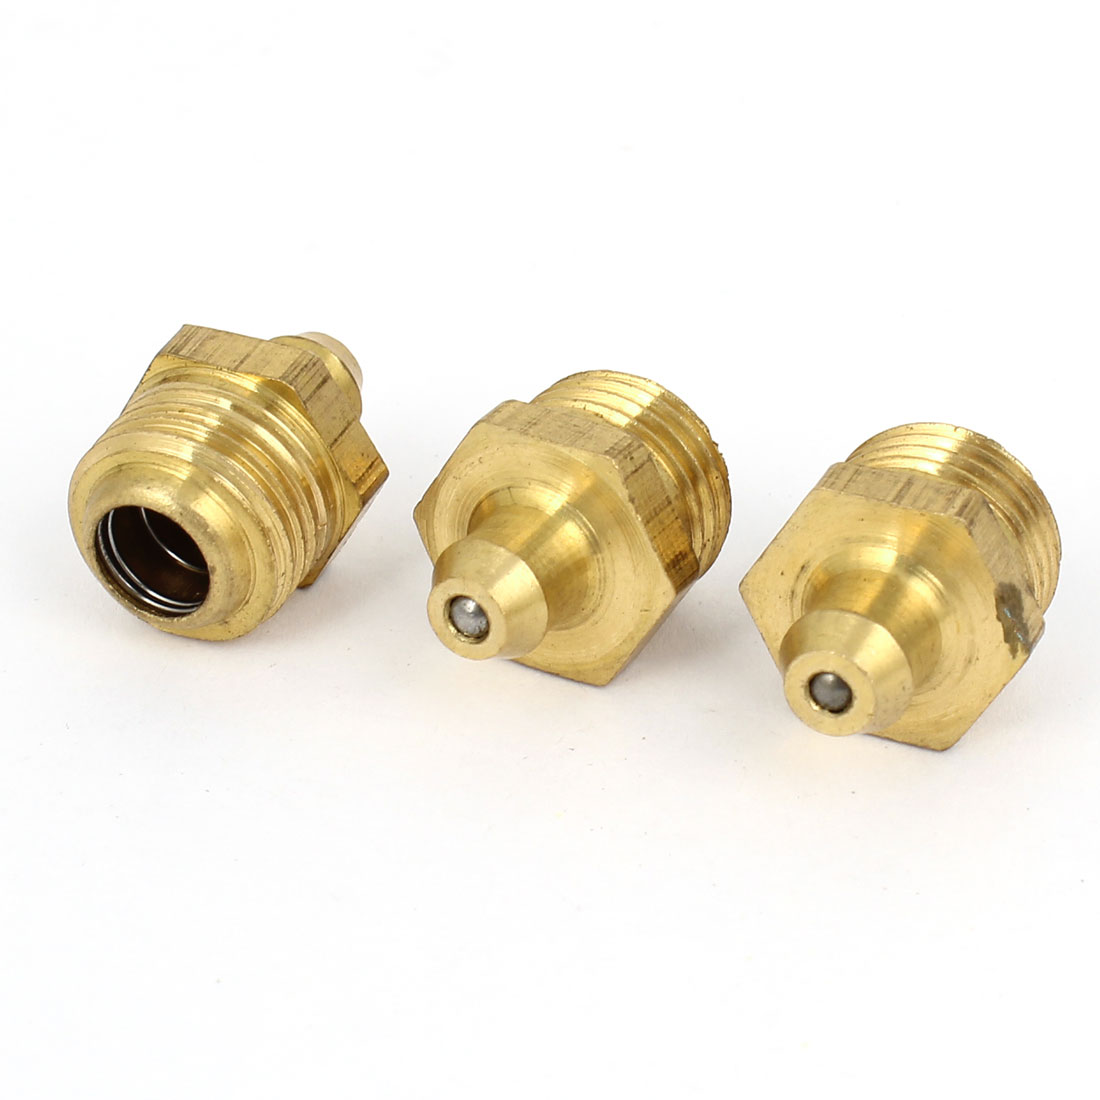 X Autohaux 3 Pcs 13Mm Dia Male Thread Straight Grease Nipples Fittings Brass Tone For Auto Car